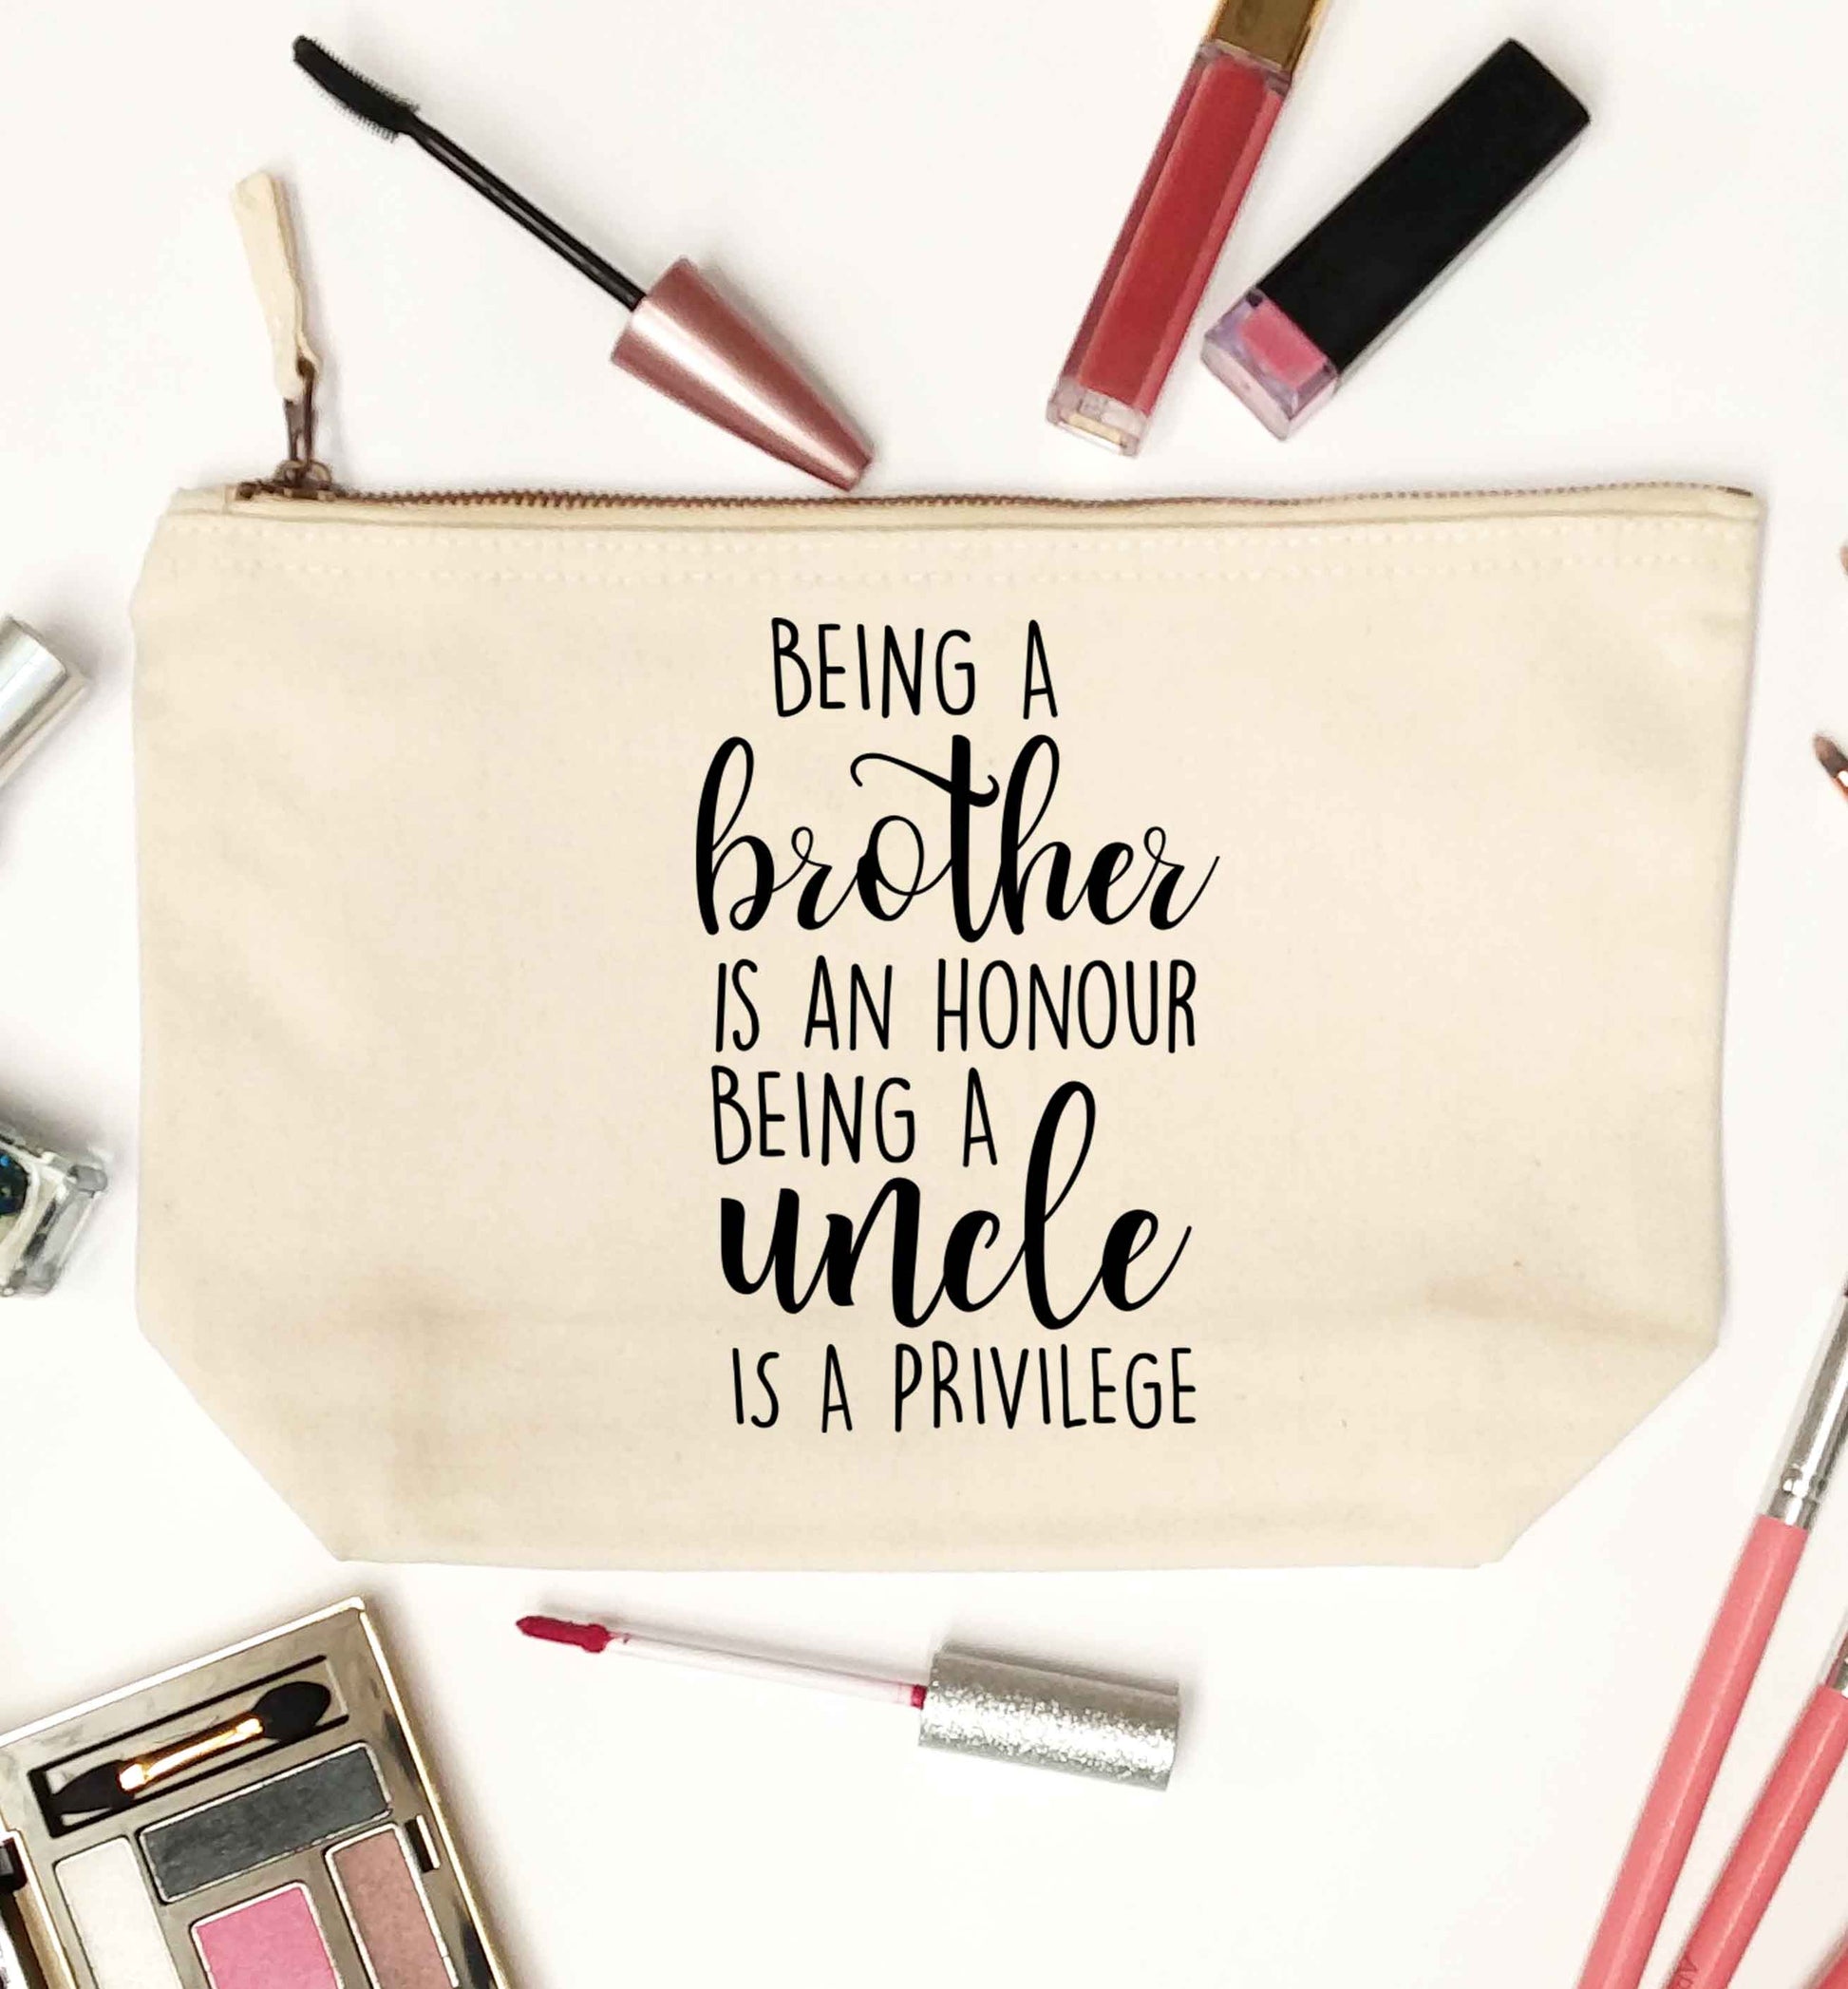 Being a brother is an honour being an uncle is a privilege natural makeup bag